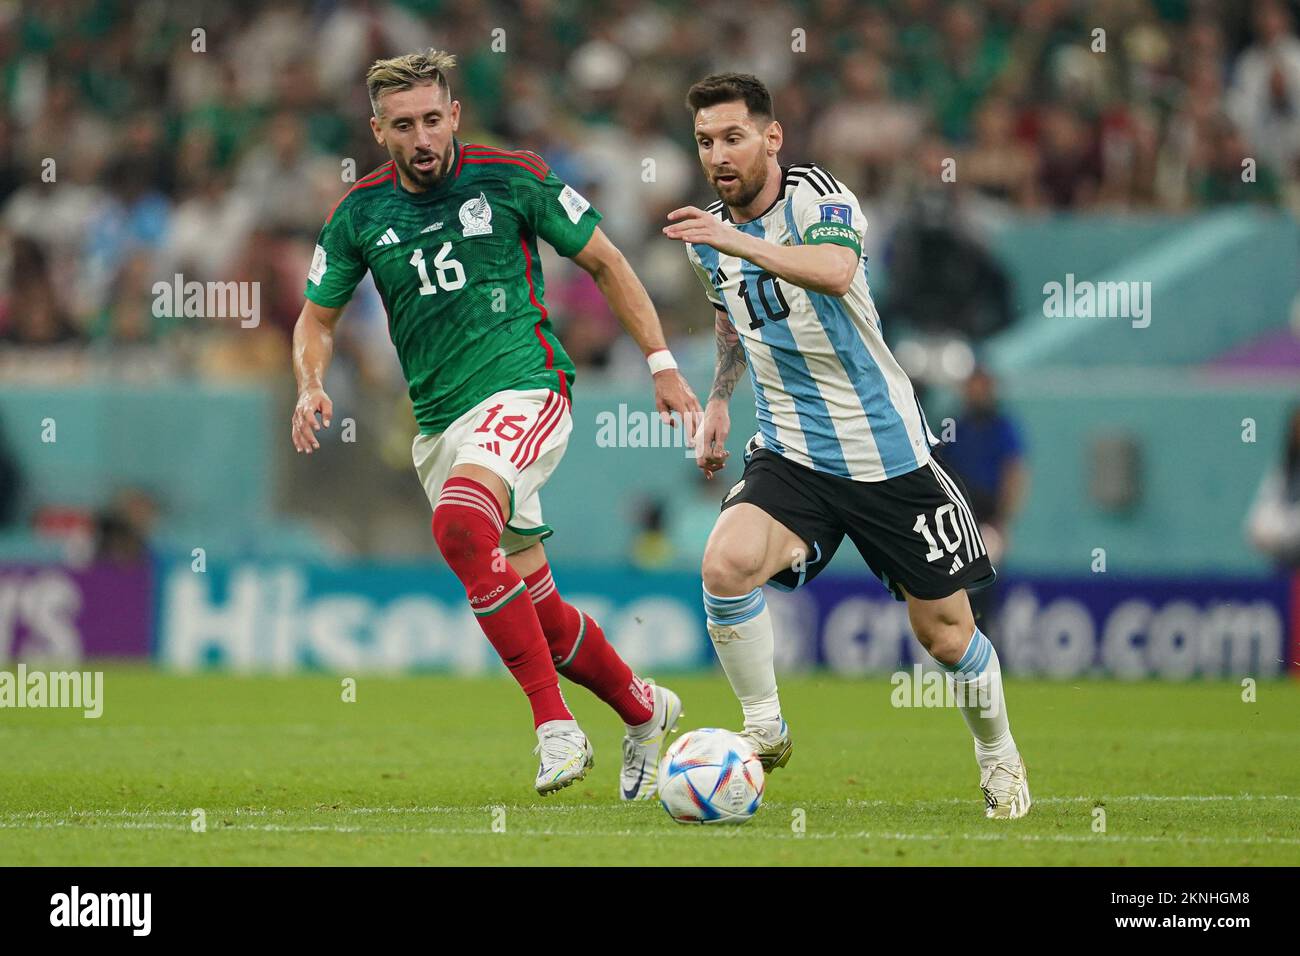 LUSAIL, QATAR - NOVEMBER 26: Player of Argentina Lionel Messi runs ahead of player of Mexico Héctor Herrera during the FIFA World Cup Qatar 2022 group C match between Argentina and Mexico at Lusail Stadium on November 26, 2022 in Lusail, Qatar. (Photo by Florencia Tan Jun/PxImages) Stock Photo